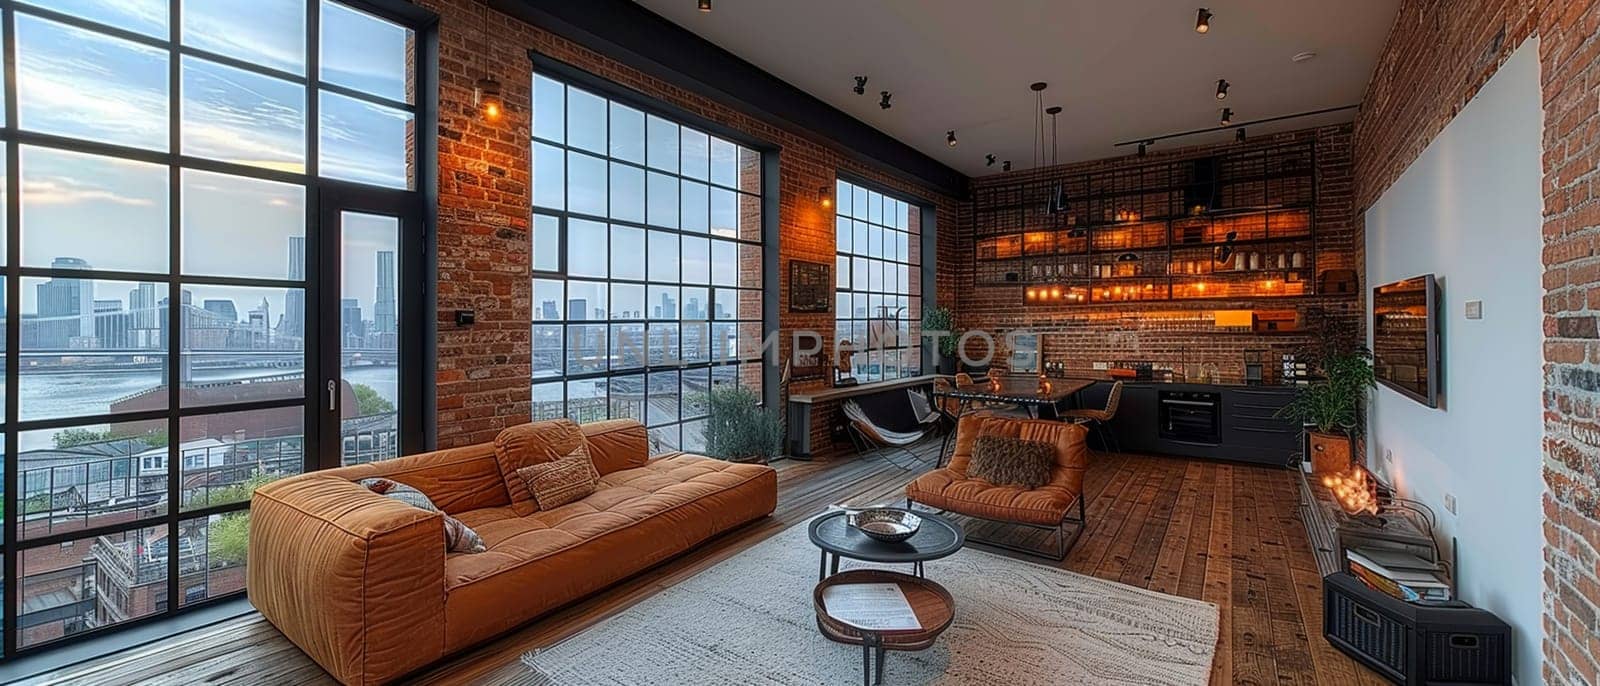 Chic Urban Loft with Exposed Brick and Industrial Features by Benzoix